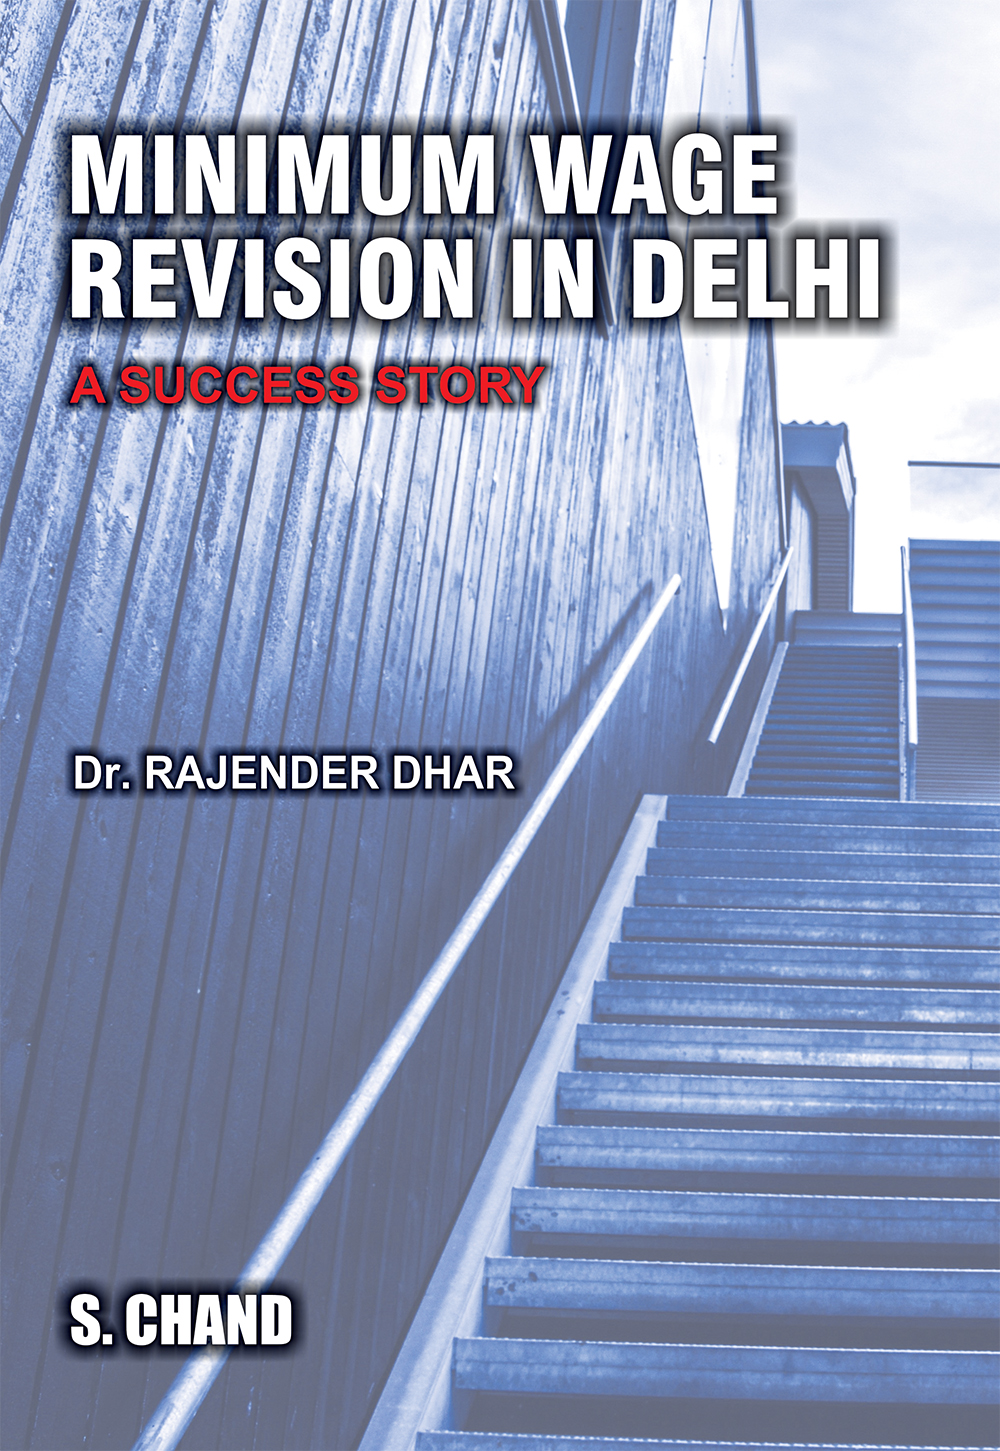 Minimum Wage Revision in Delhi – A Success Story